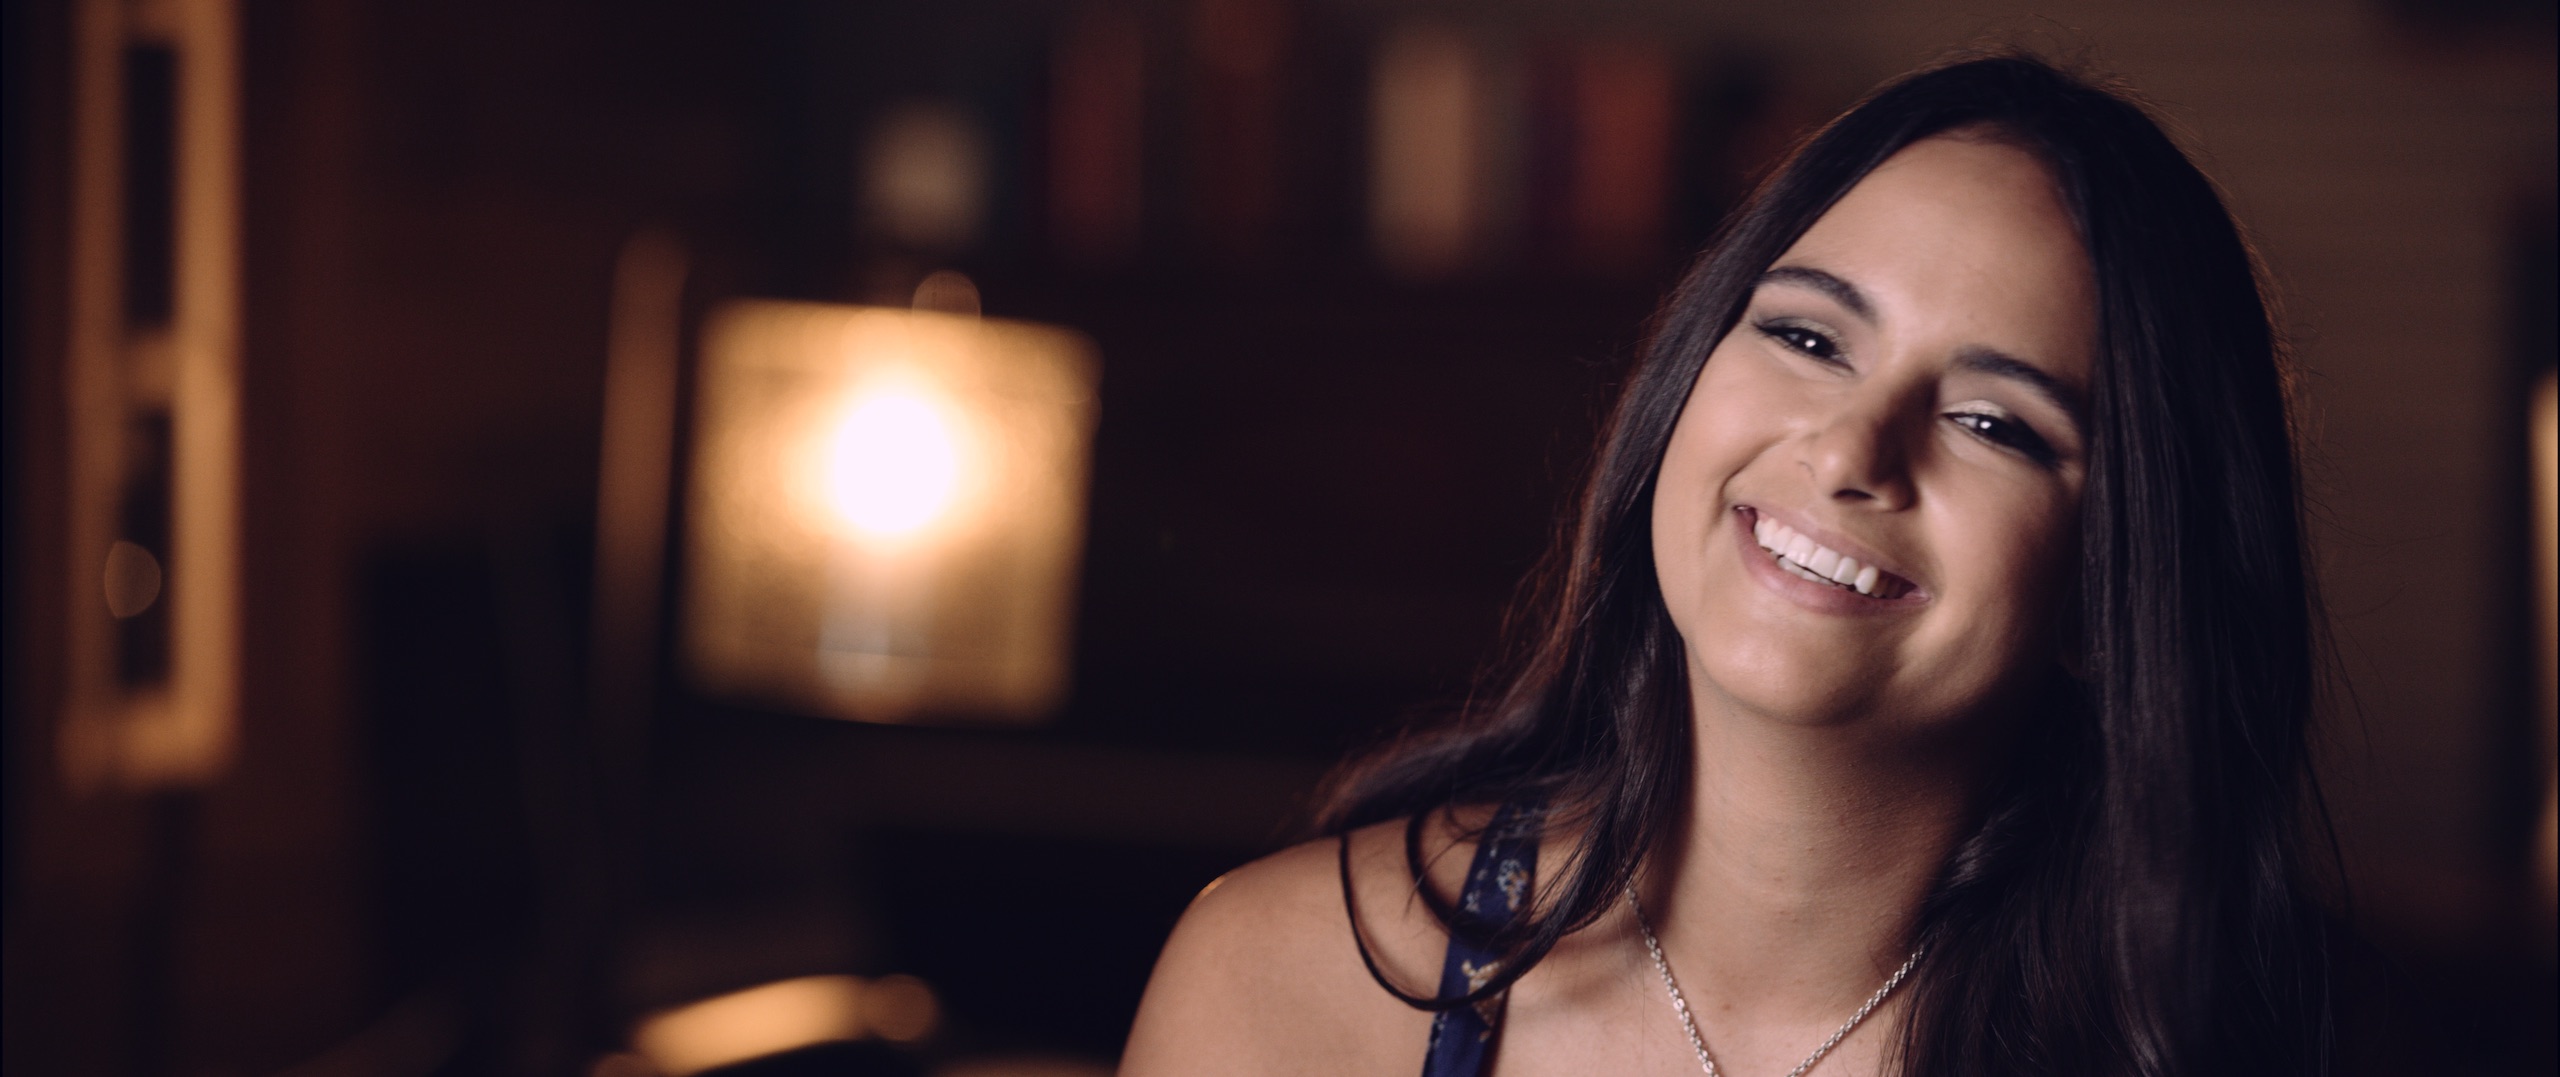 The Dailies Episode 202 BTS Footage with closeup headshot of Mercedes Gutierrez smiling for the camera